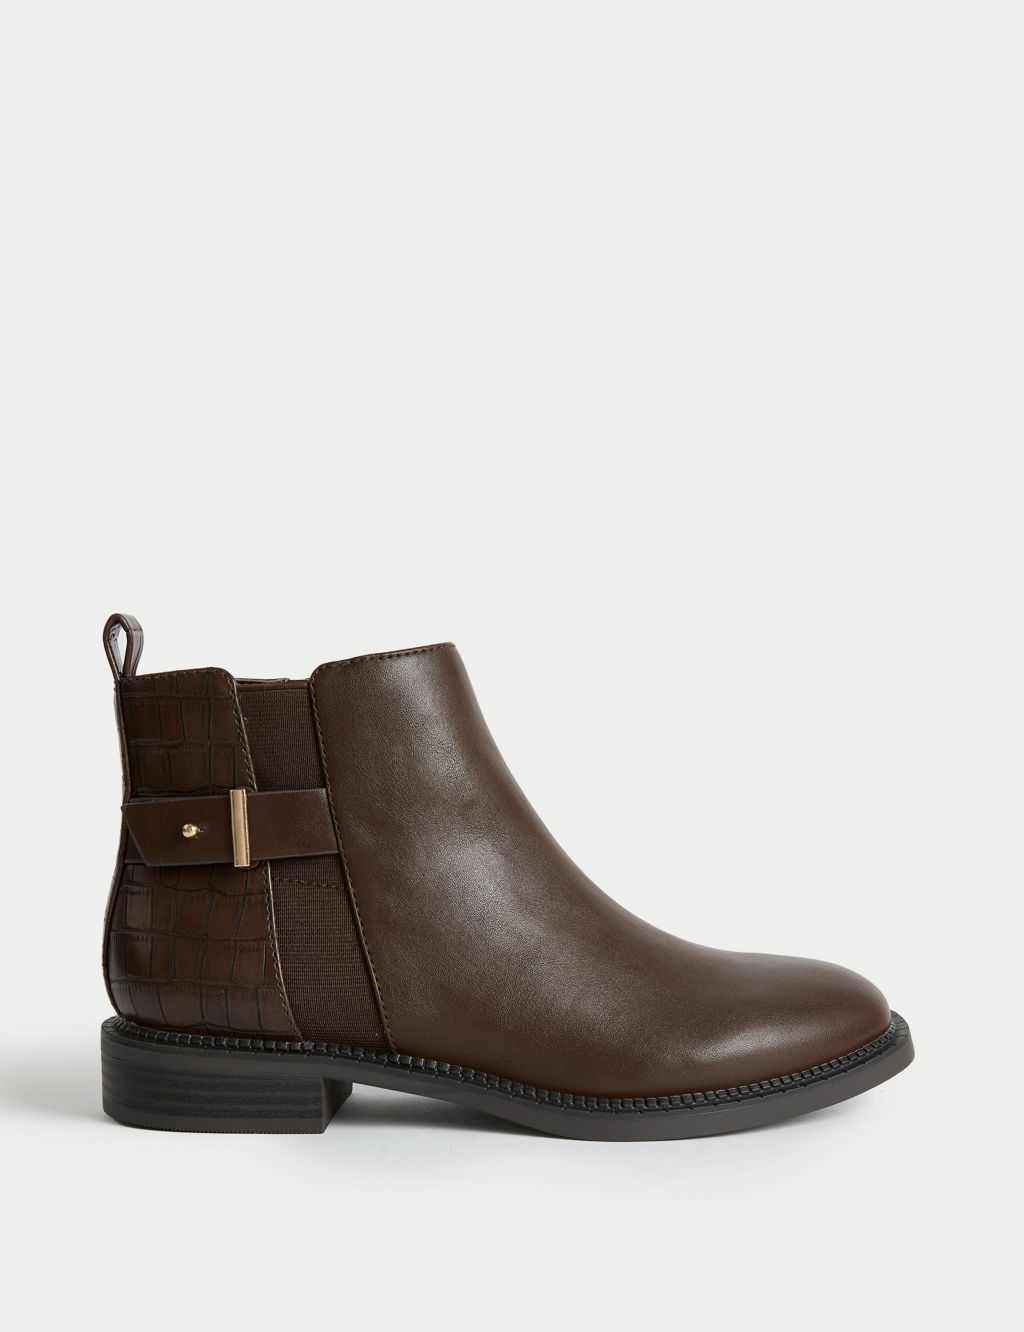 Croc Buckle Ankle Boots image 1